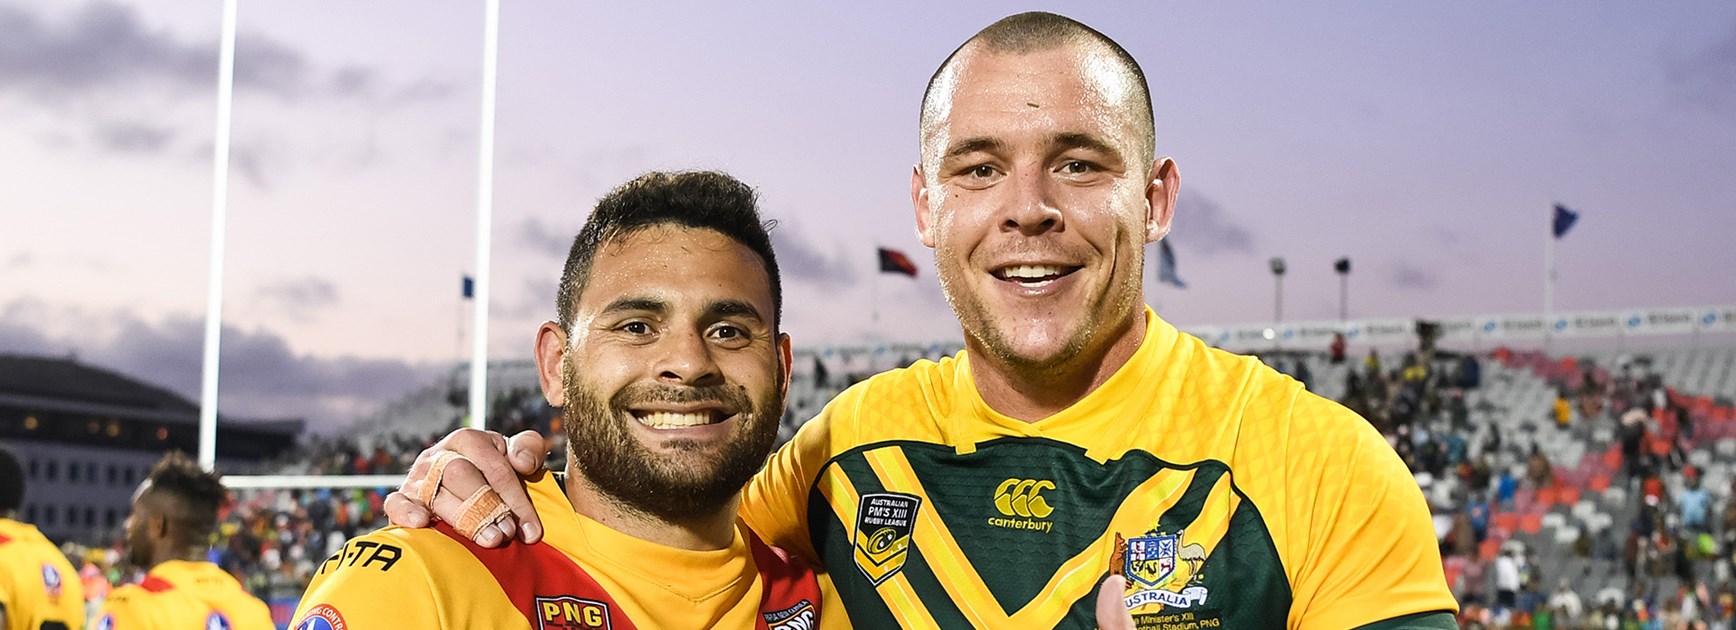 After pitch invasion, PM's XIII prevail